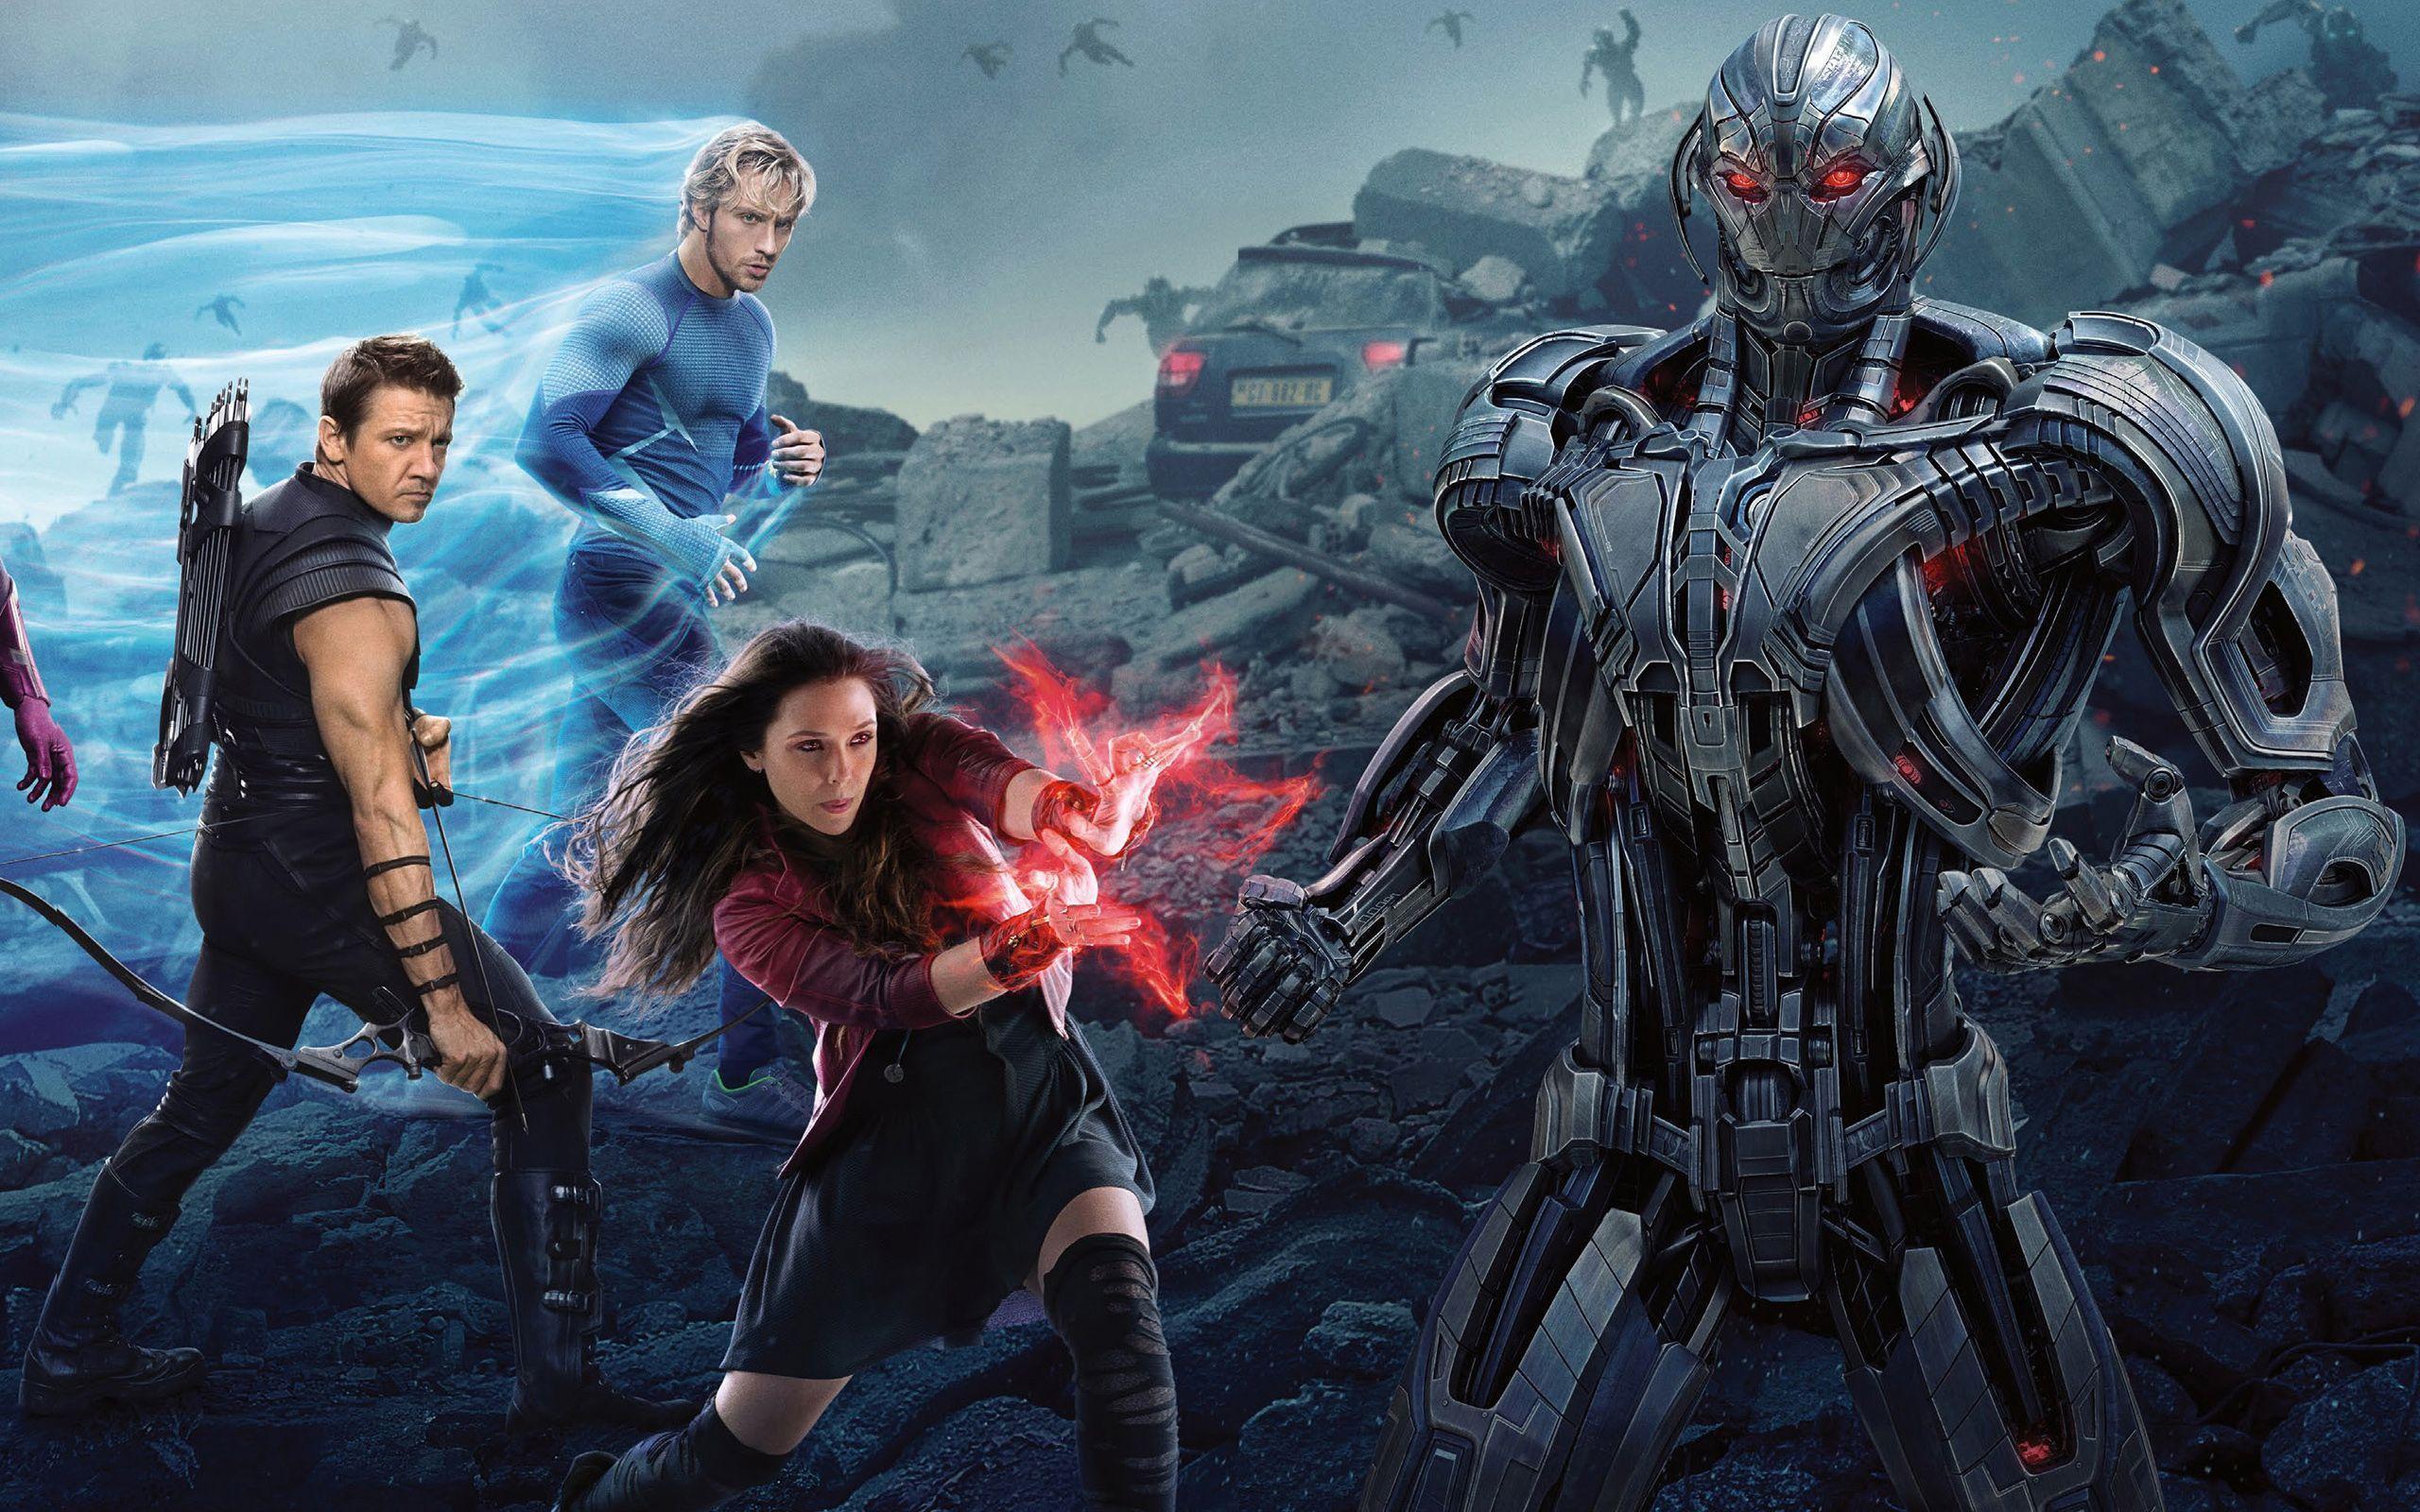 Avengers Age of Ultron (2015) Movie Story Summary & Review